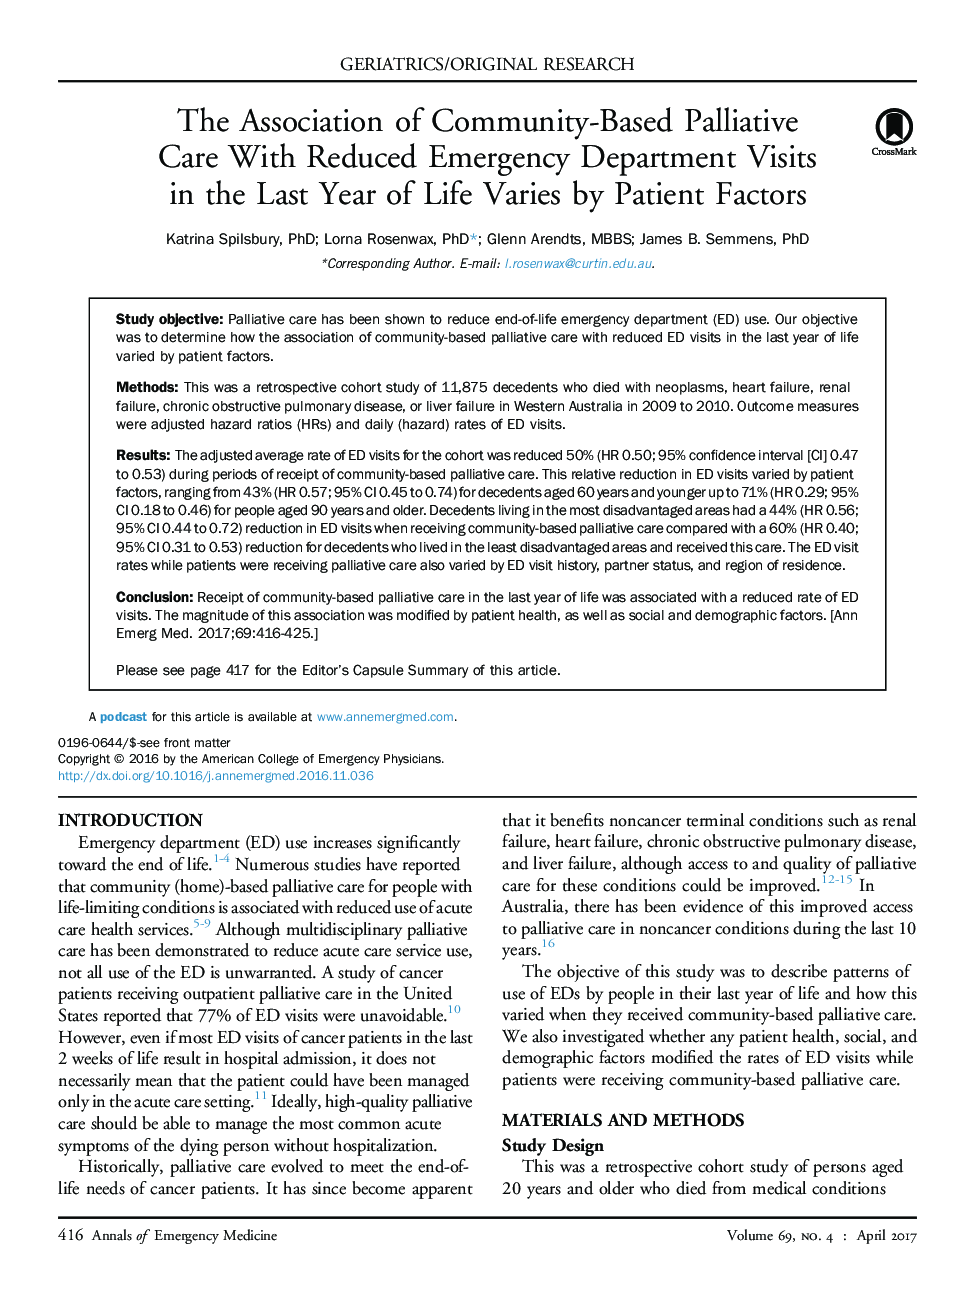 The Association of Community-Based Palliative Care With Reduced Emergency Department Visits in the Last Year of Life Varies by Patient Factors